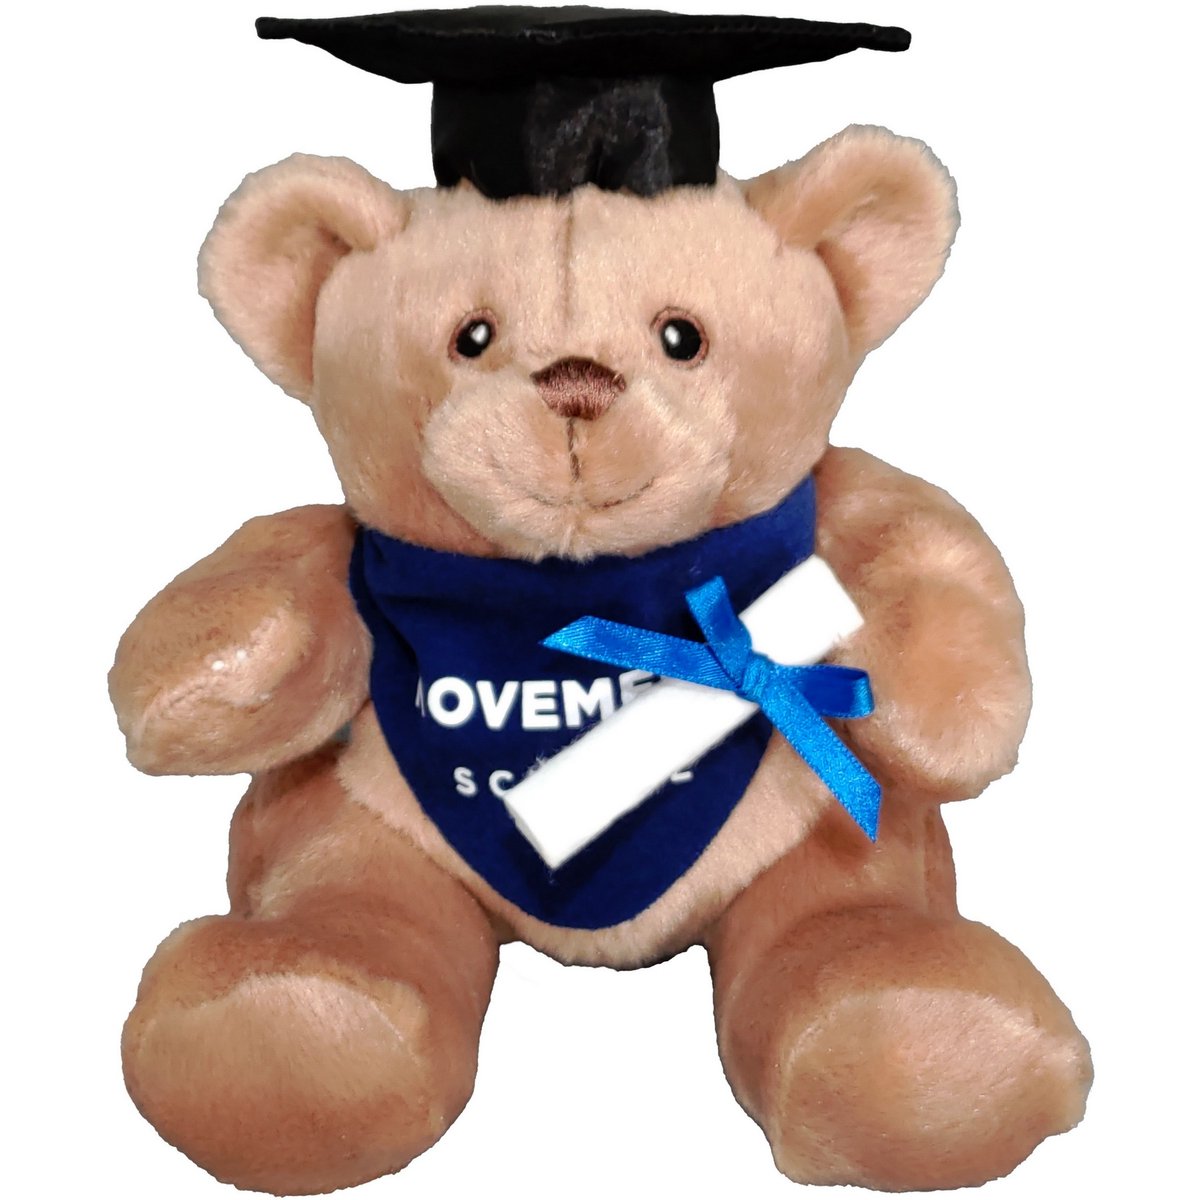 Graduation is just around the corner.
Are you ready?

Graduation Bears are a great student gift for achieving any level of school! min order qty 24

#preschool #kindergarten #grammarschool #middleschool #highschool #college #university #GRADUATION #gift #diploma #certificate #GED